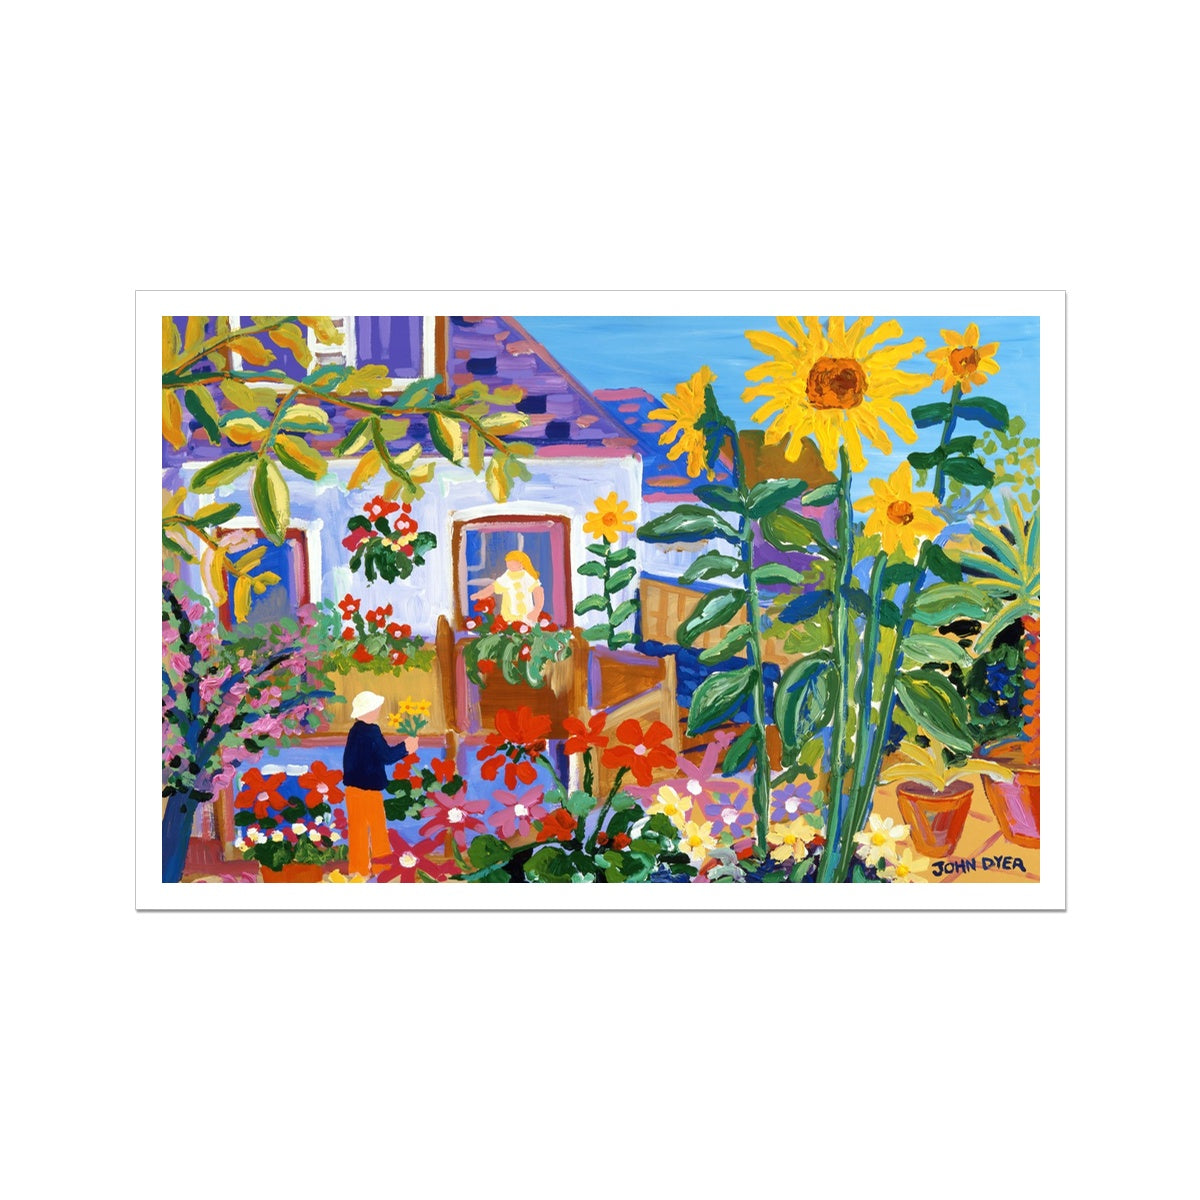 John Dyer Museum Quality Open Edition Cornish Art Print. 'Collecting Flowers in a Cornish Garden'